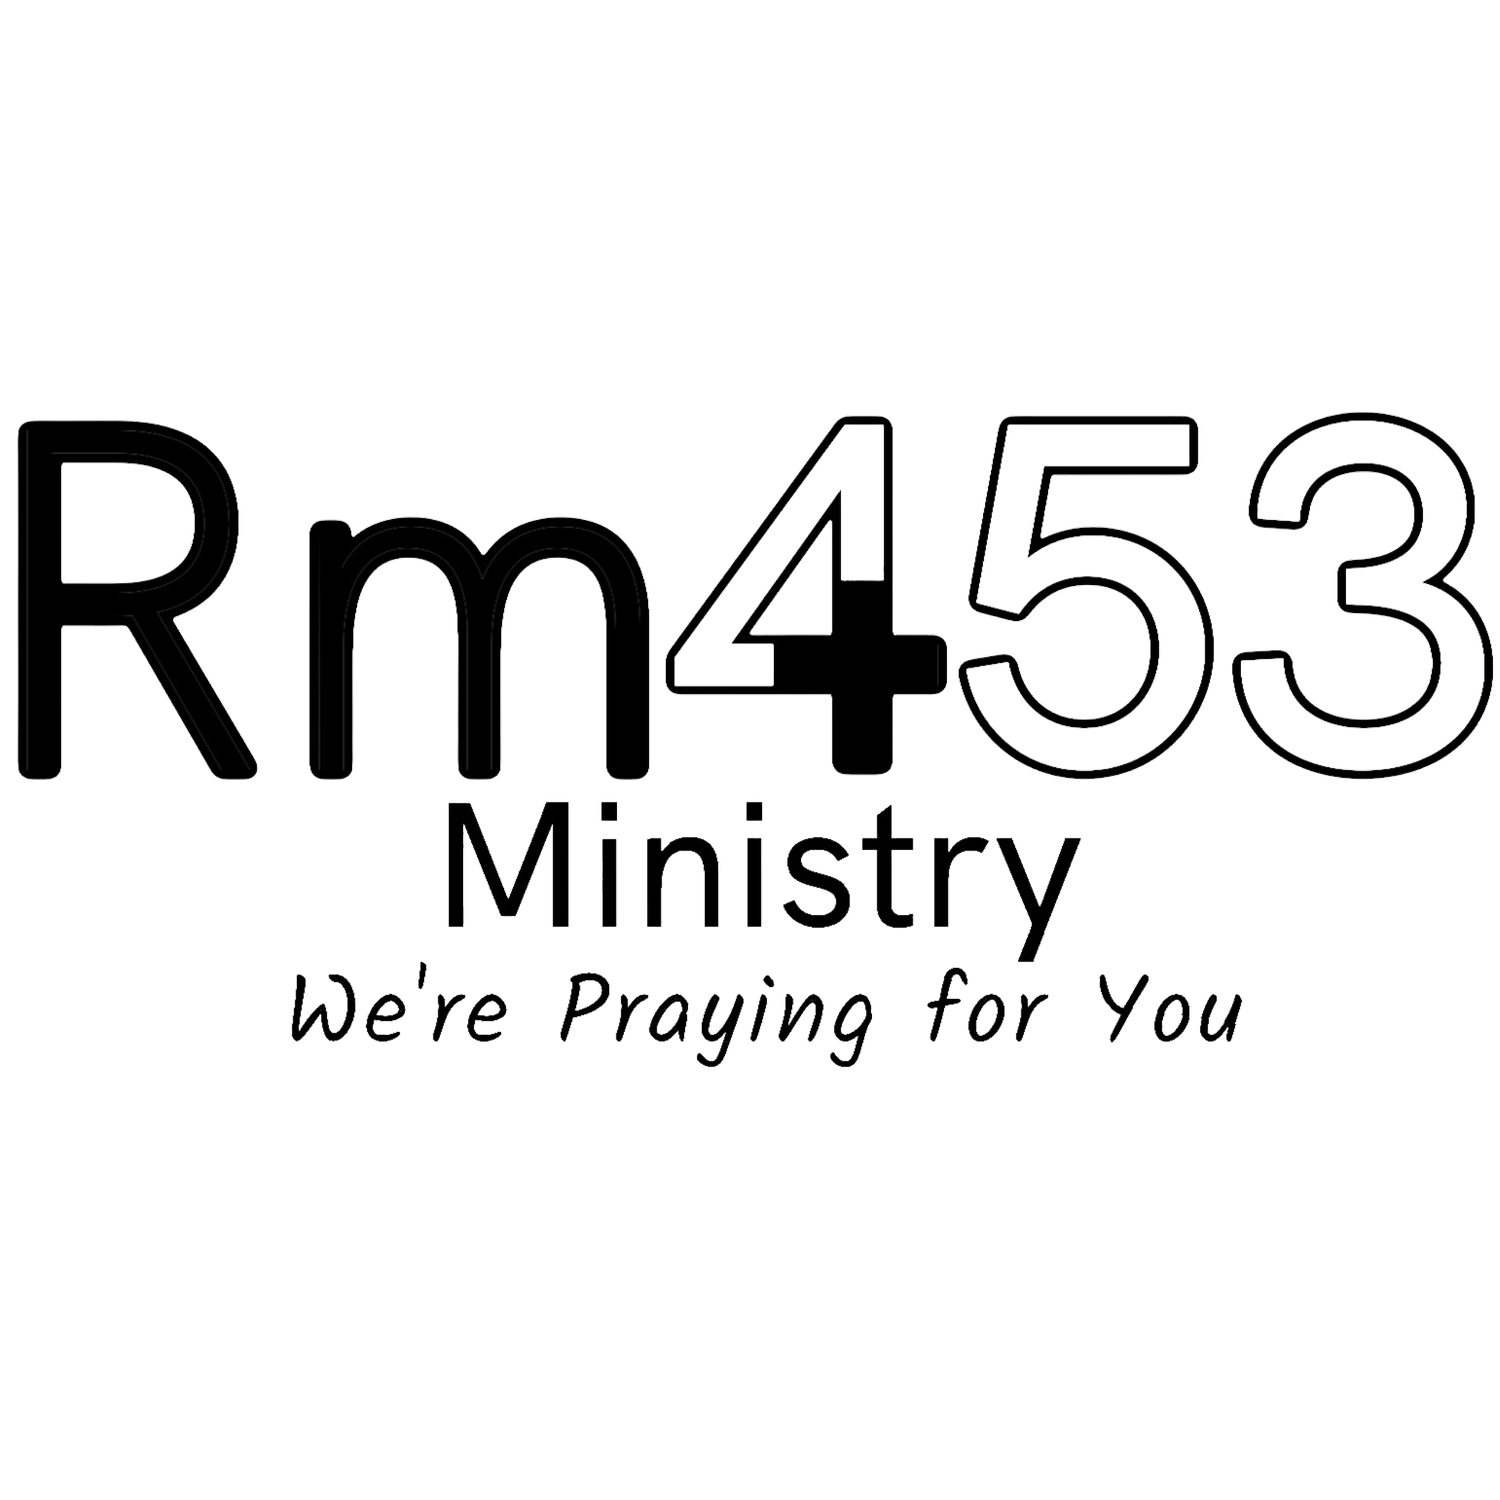 Room 453 Ministry